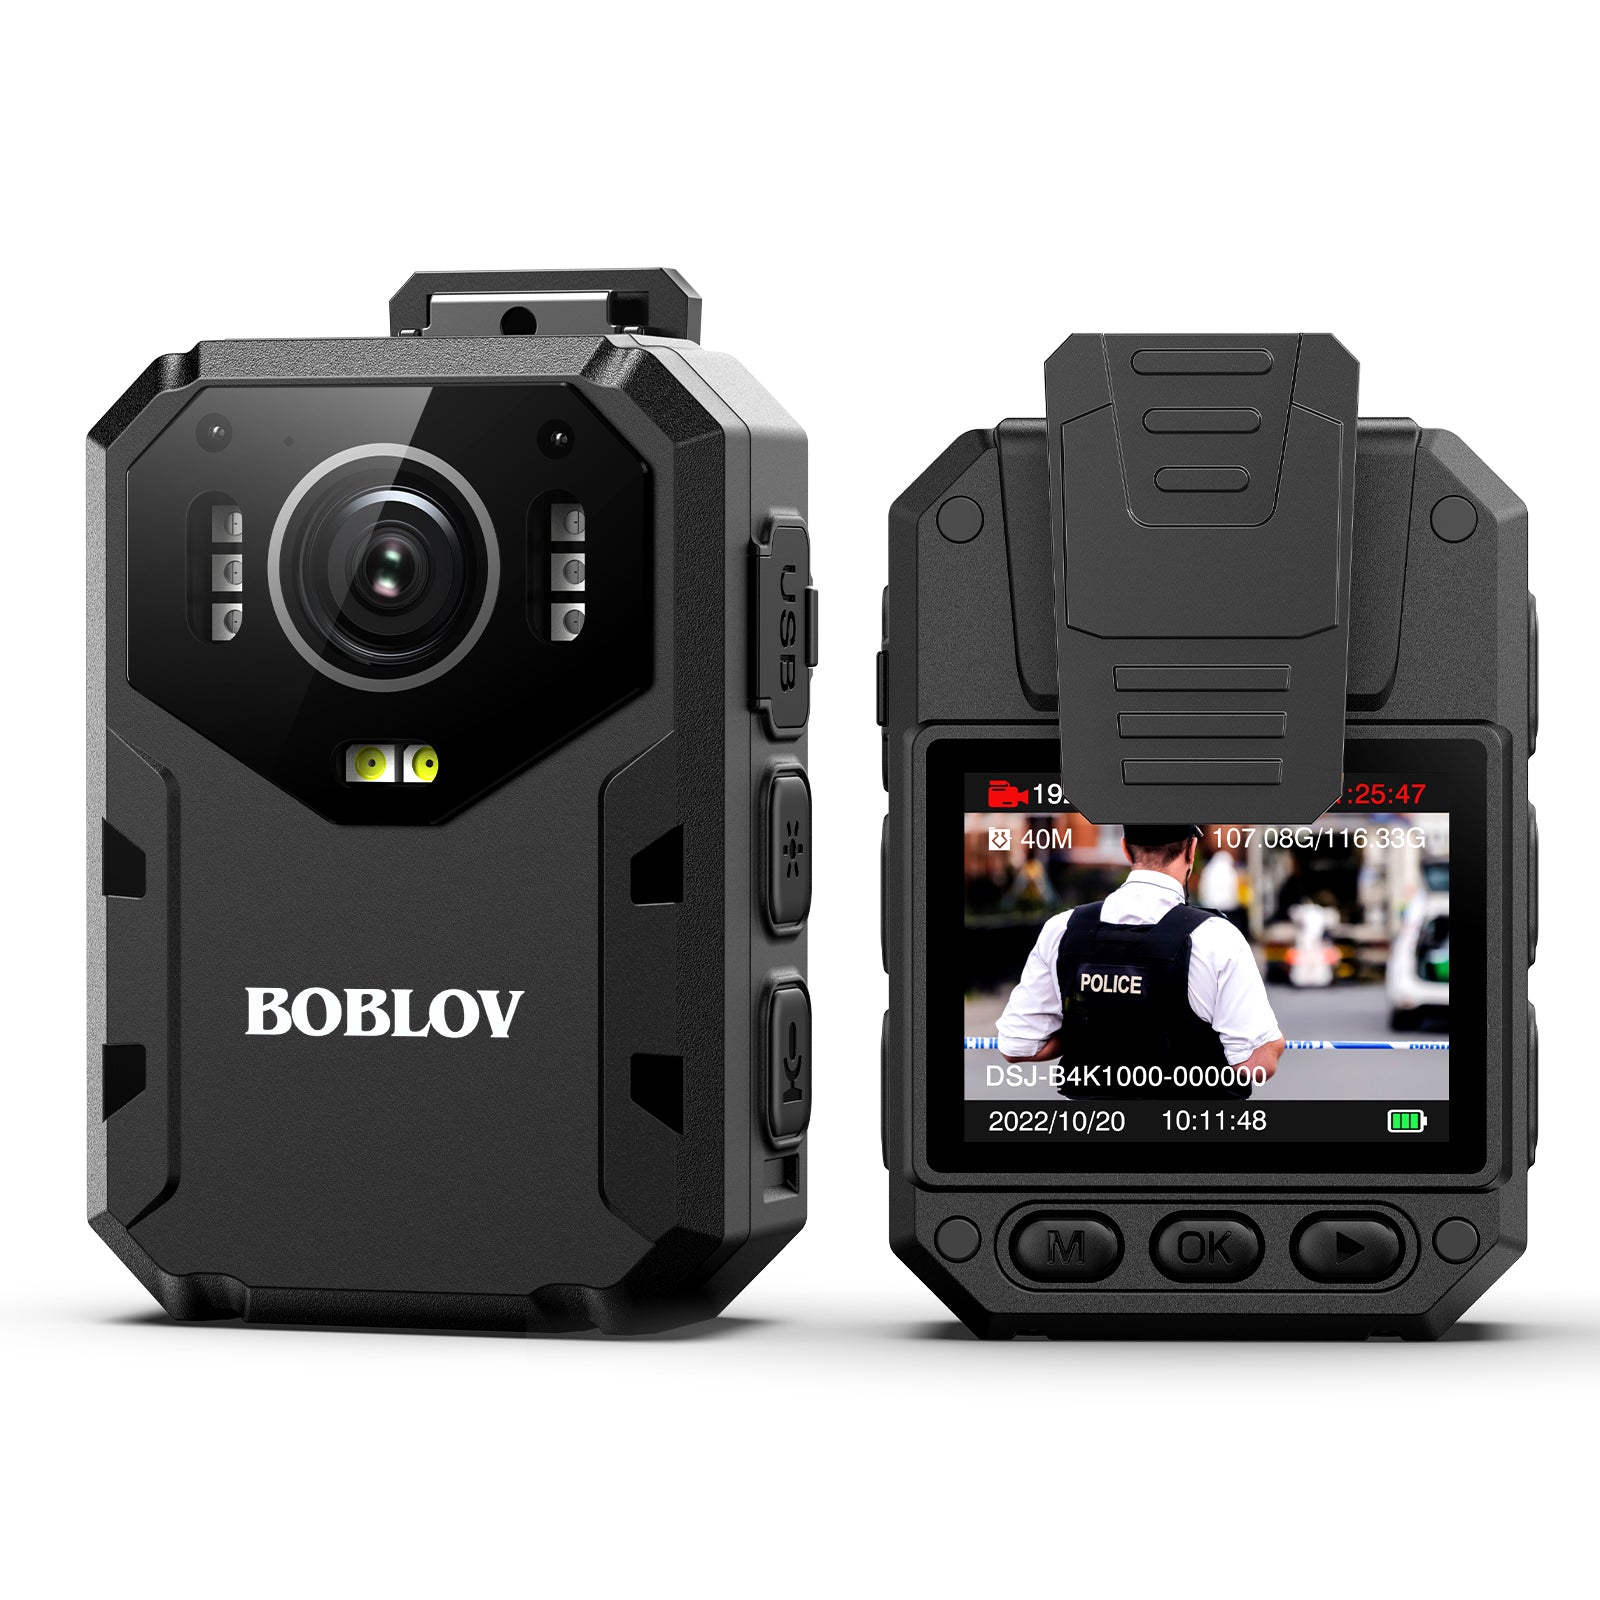 BOBLOV B4K1 128GB 4K body camera with GPS and 3100mAh battery for extended 10-12 hours shooting, includes car suction mount and charger4